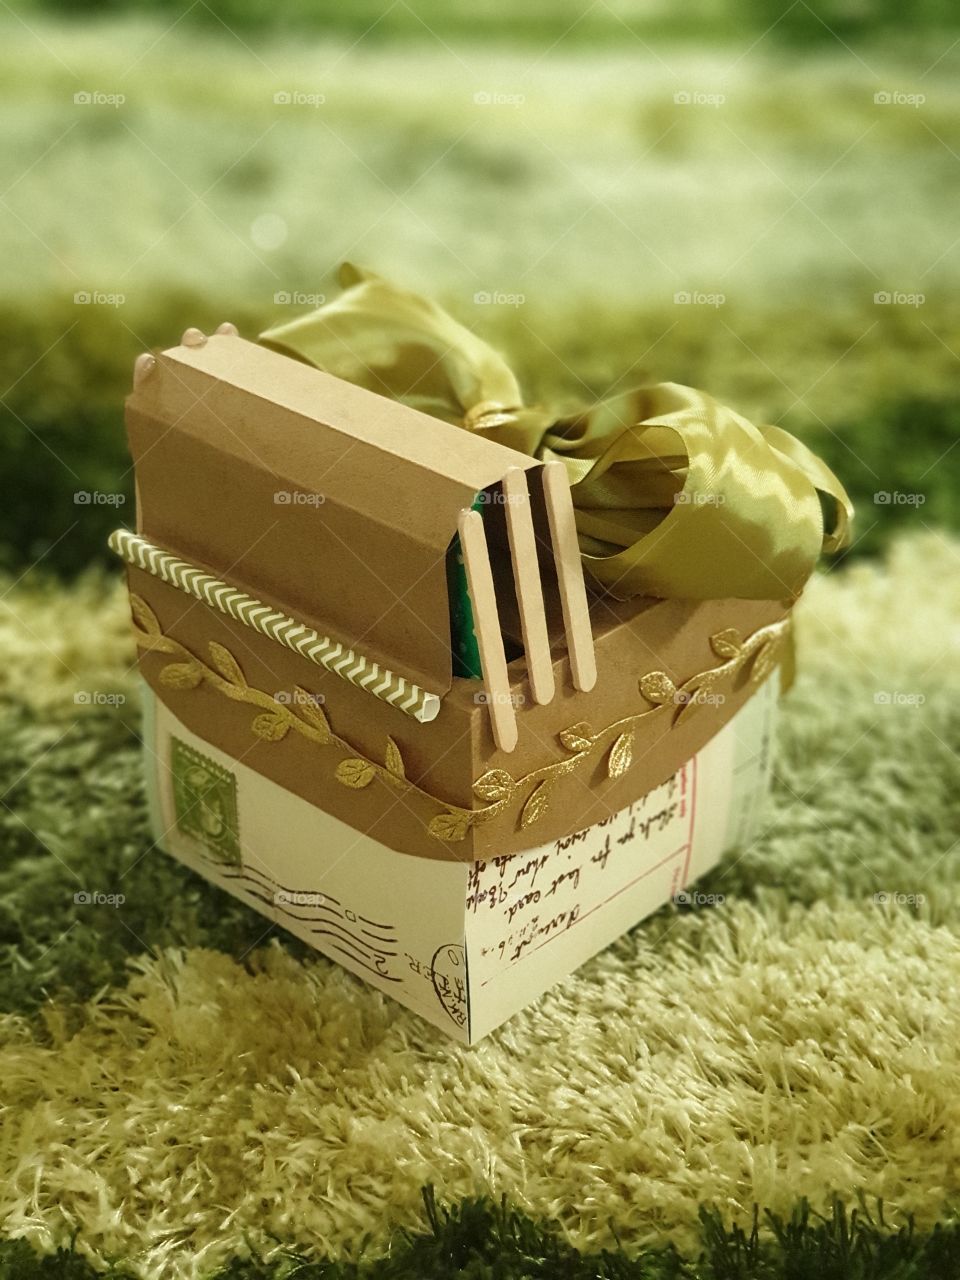 Explosion box card as a unique personalised gift with large green satin ribbon